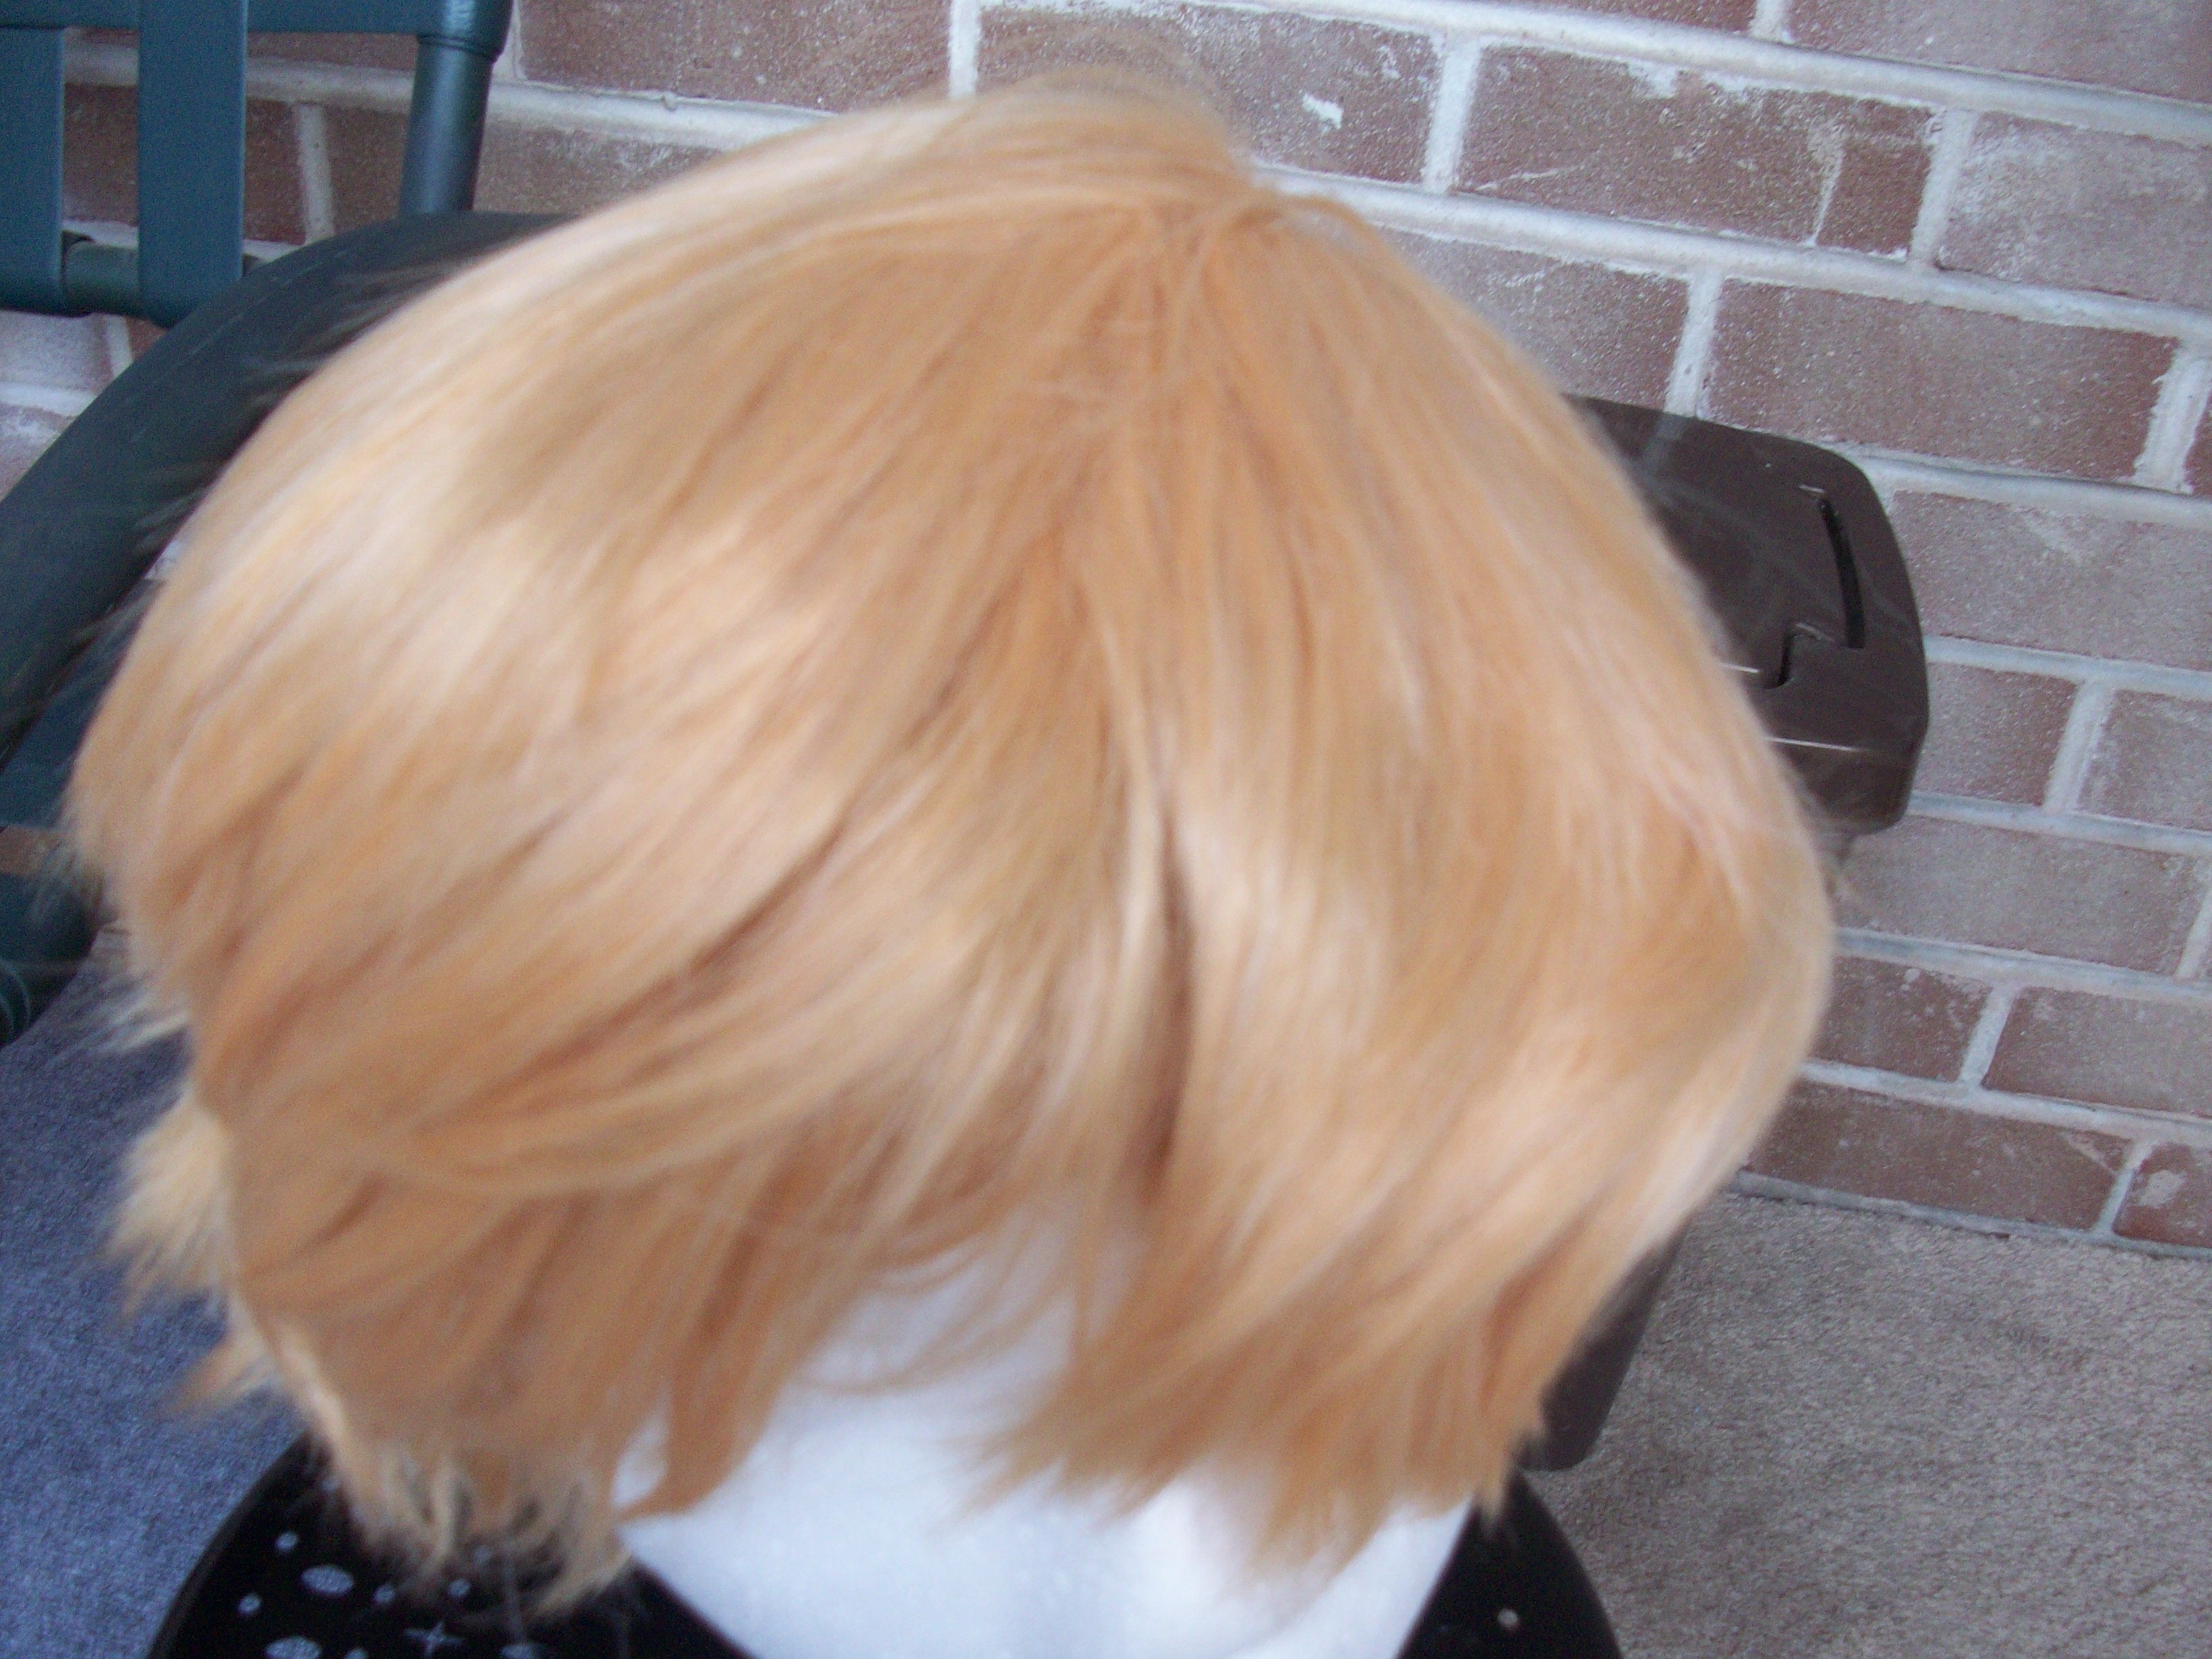 Wig is orange and very poor quality